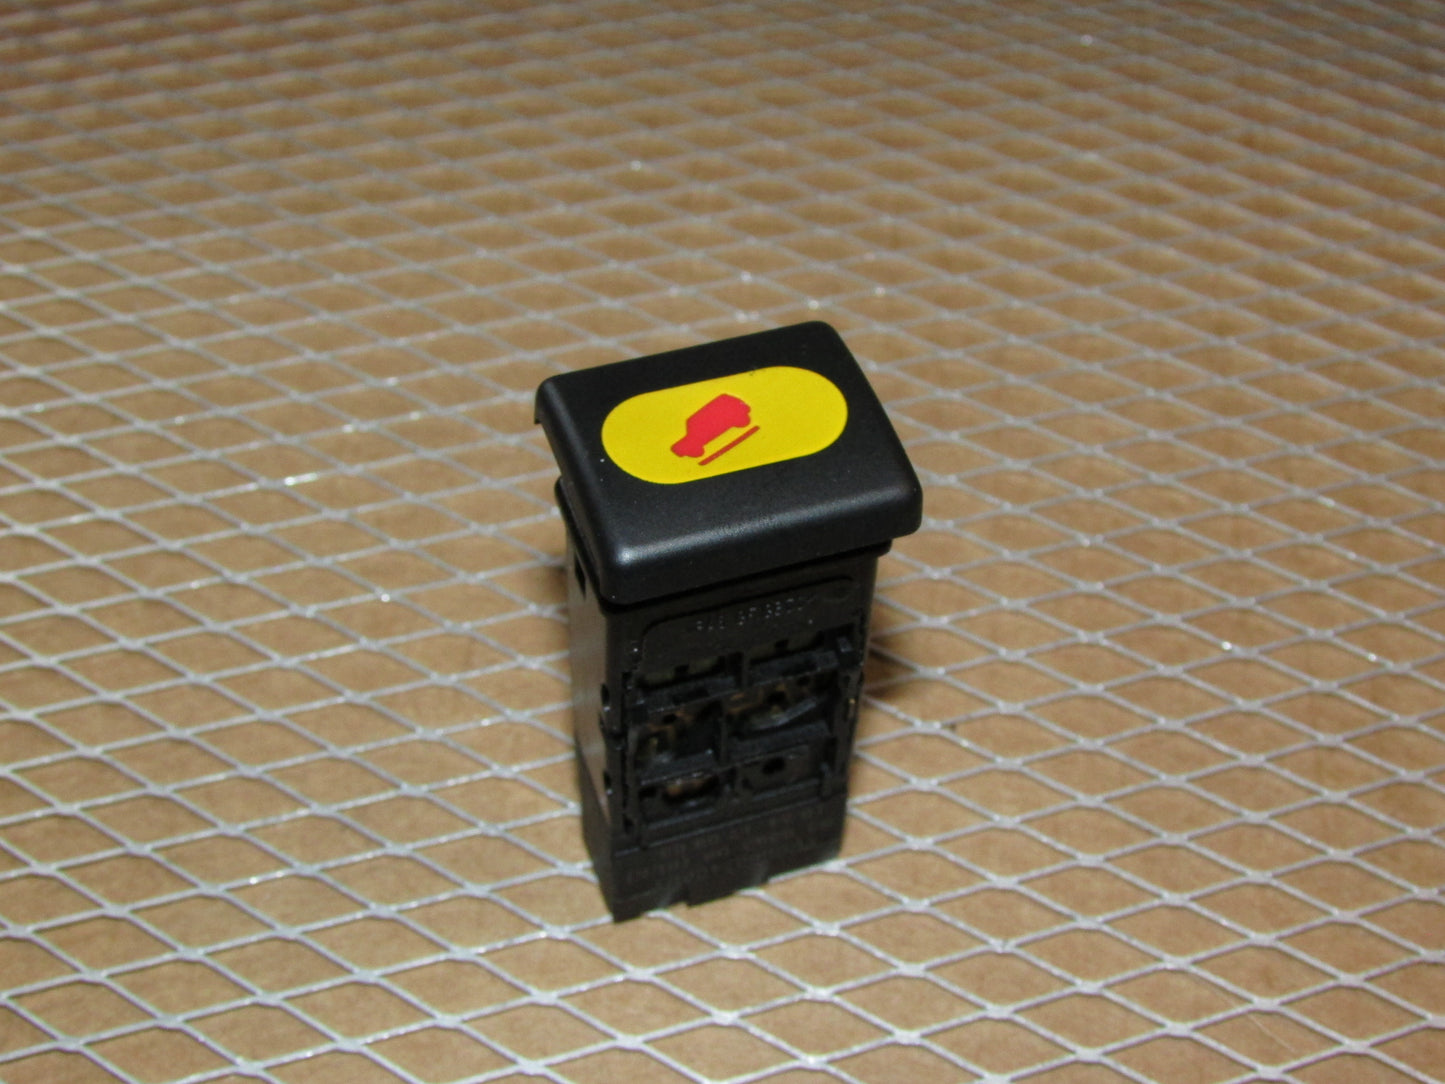 03 04 Land Rover Discovery 2 OEM HDC Hill Descent Control Switch